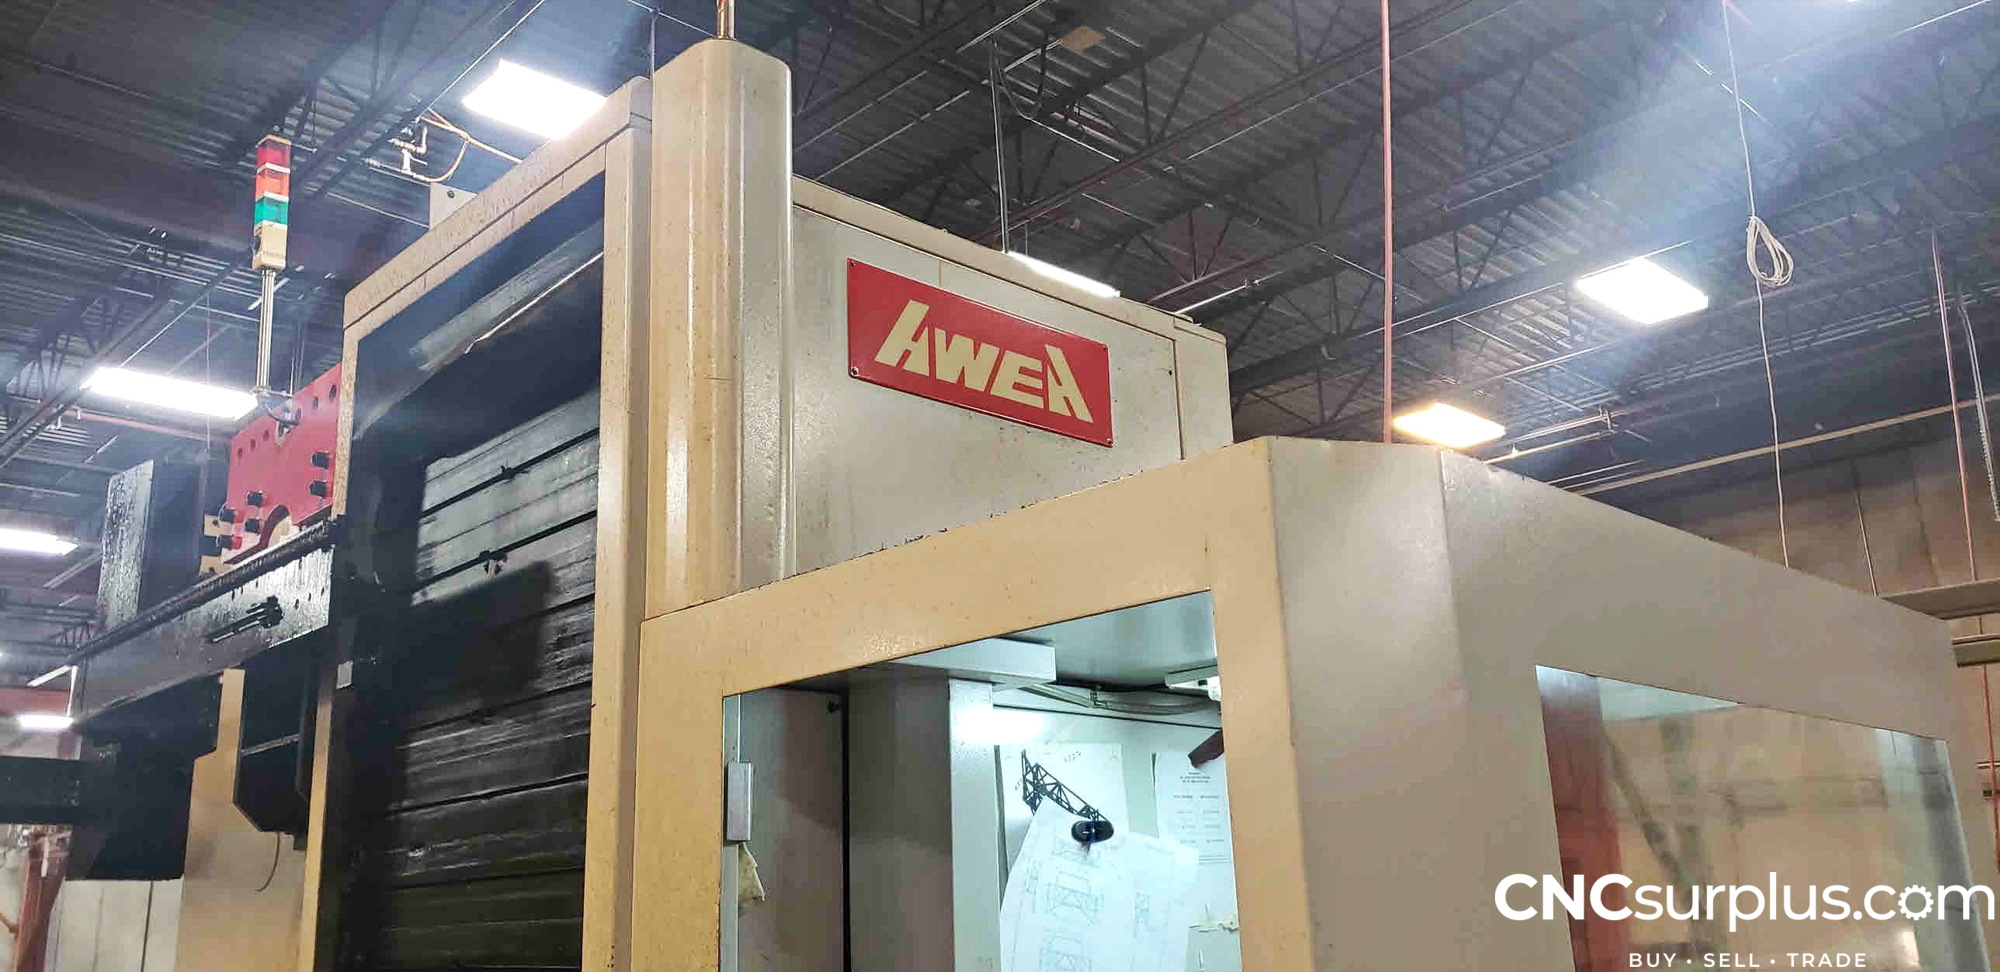 2009 AWEA BL3018FM Horizontal Table Type Boring Mills | CNCsurplus, A Div. of Comtex Leasing Corp.